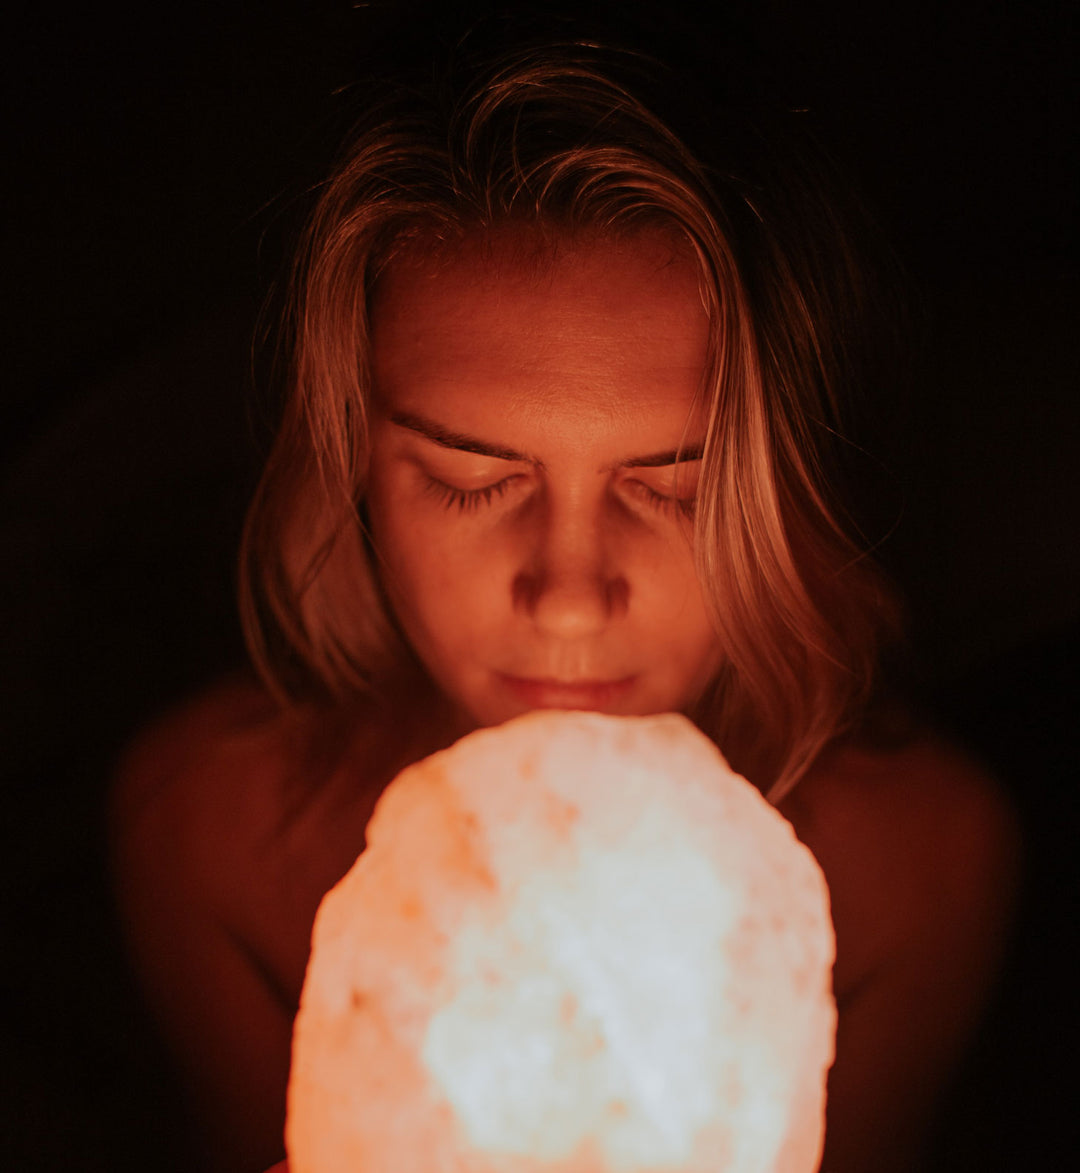 8 Reasons Why We All Need a Salt Lamp